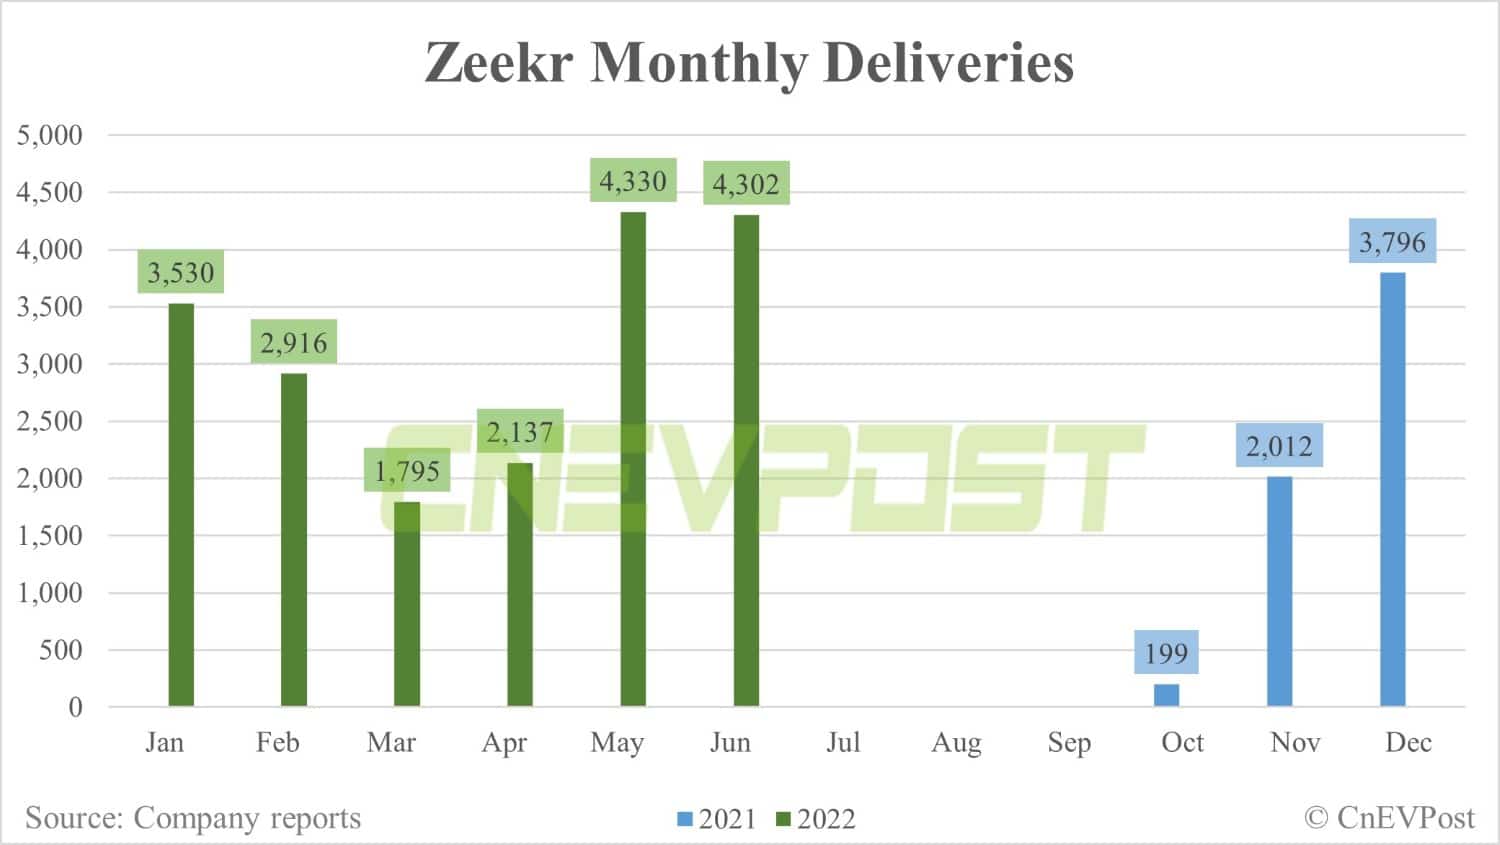 Zeekr delivers 4,302 vehicles in June, basically flat from May-CnEVPost